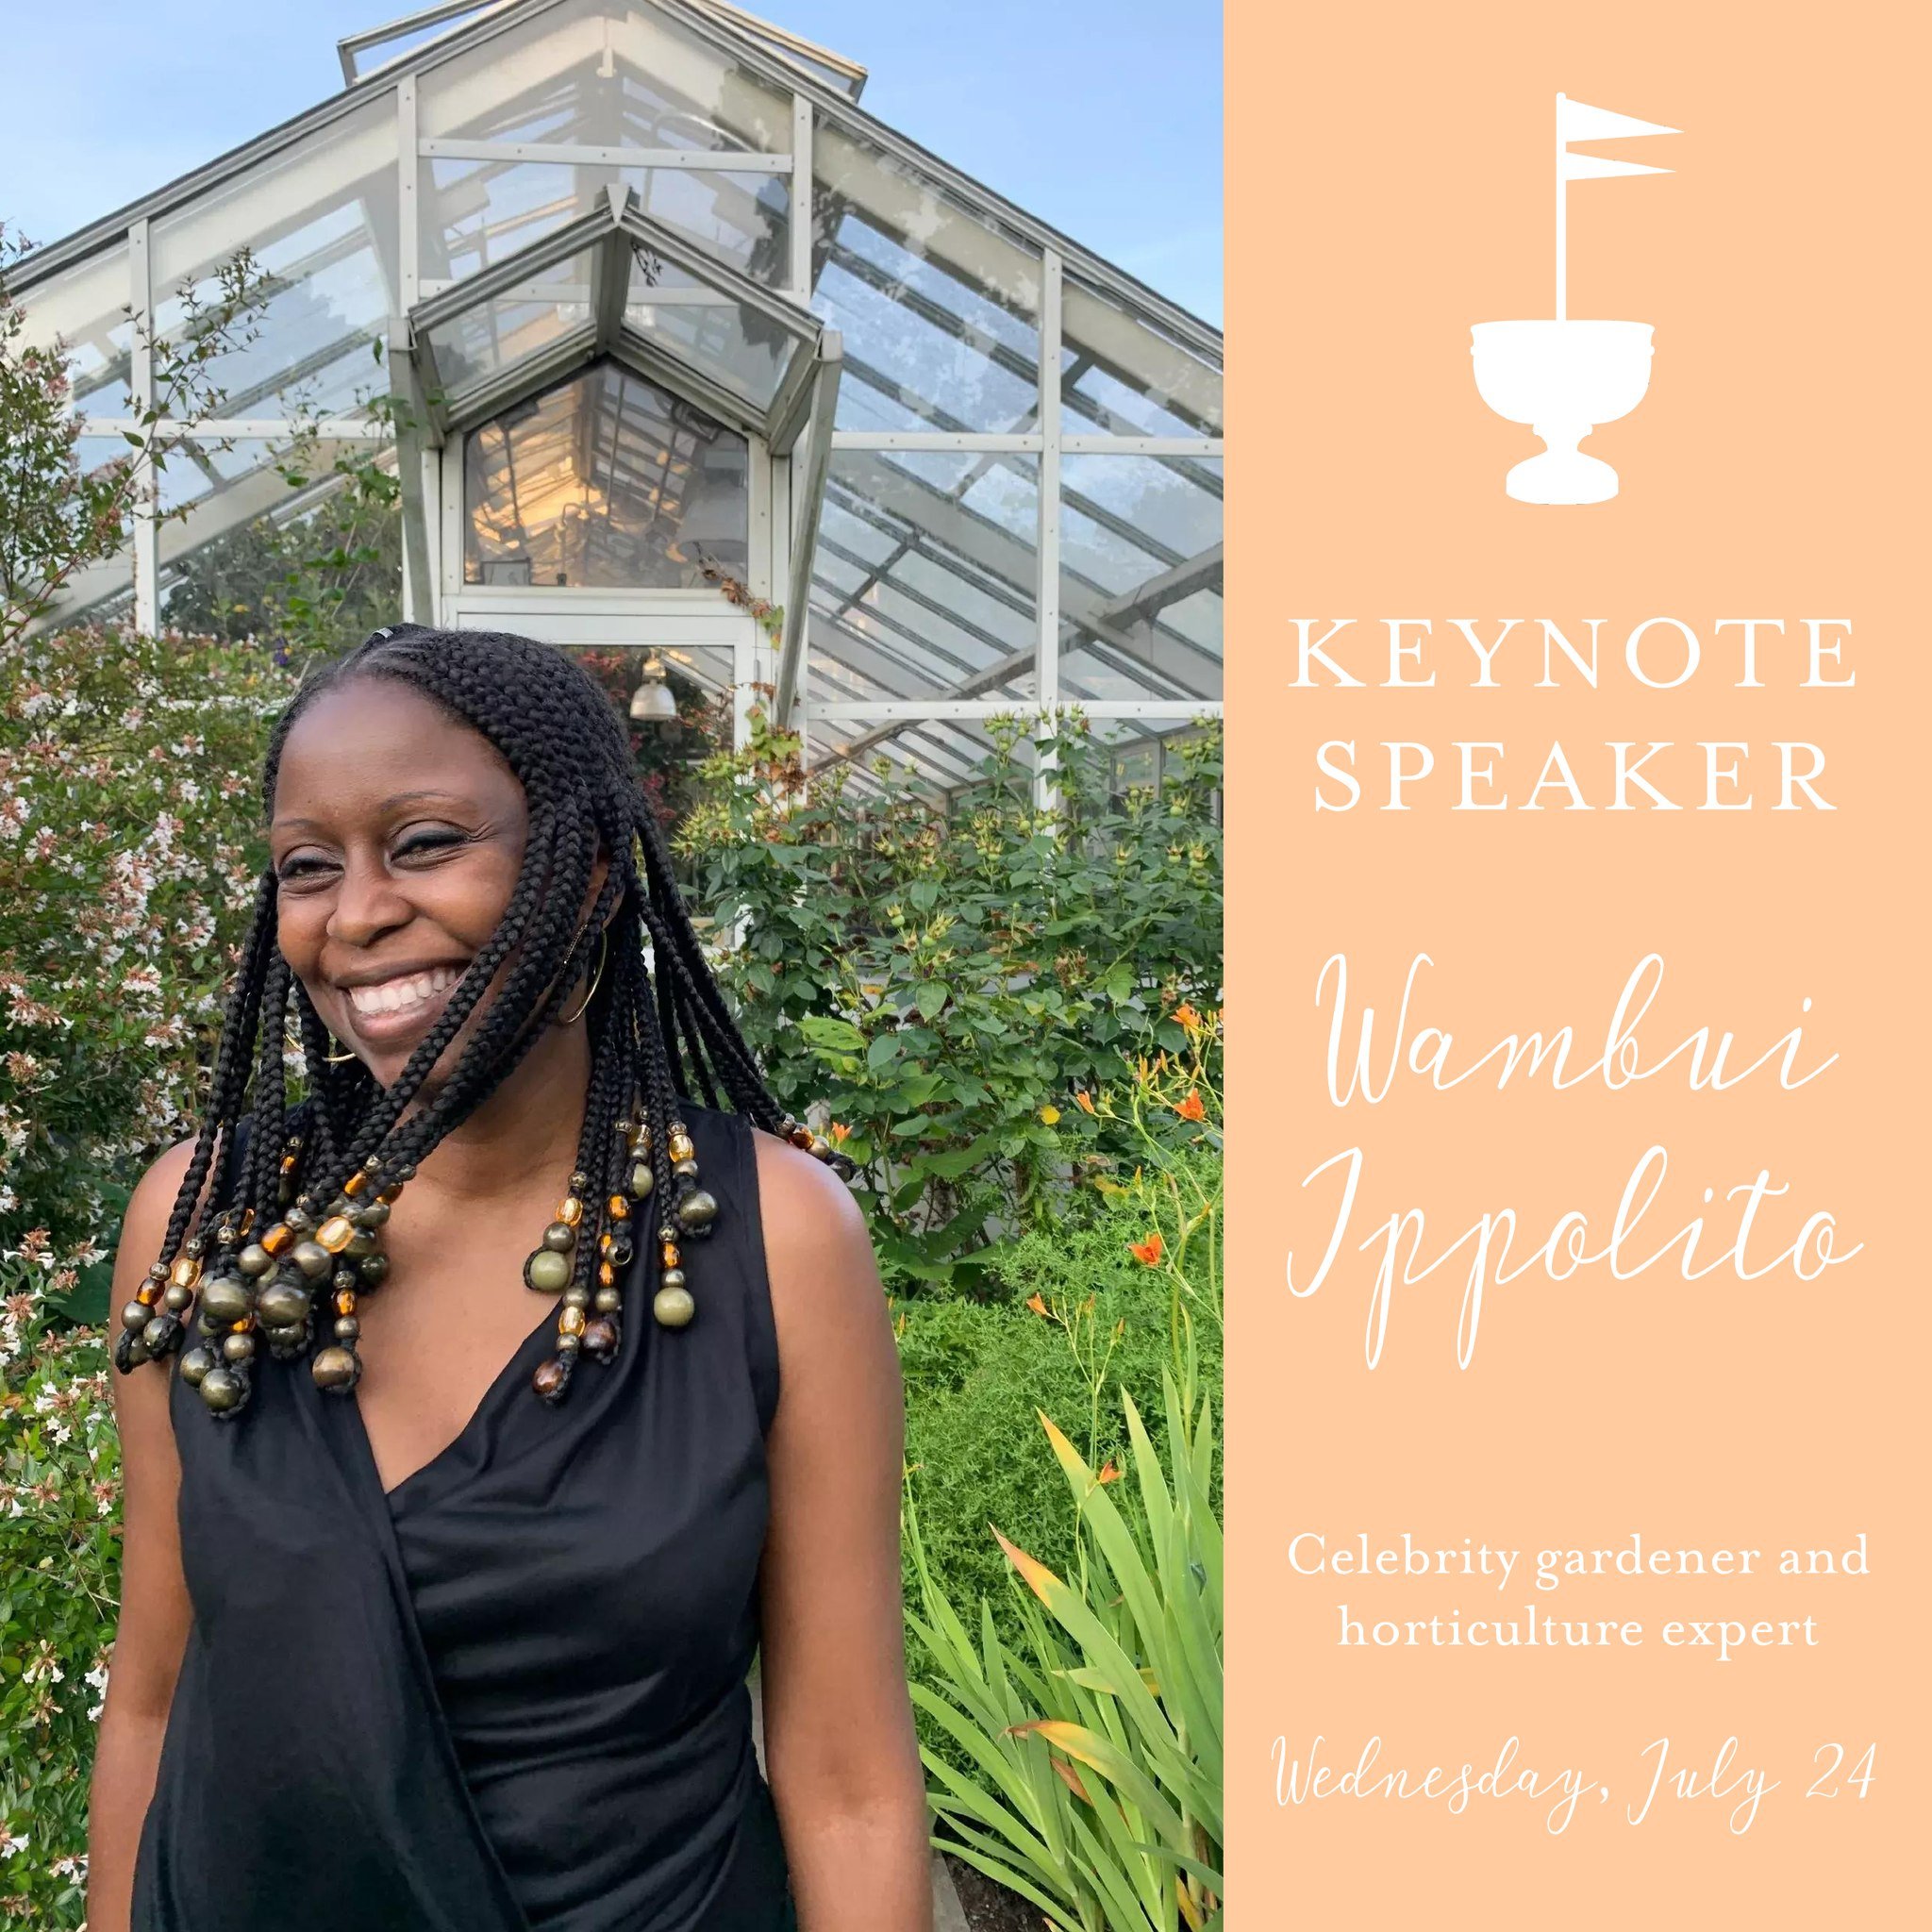 🌟 We're thrilled to announce our Keynote Speaker for Nantucket Garden Festival: the incredible Wambui Ippolito, celebrity gardener extraordinaire! 🌿🌸 Join us as she shares her passion for gardening and sustainable living. 🎤 Event details and tick